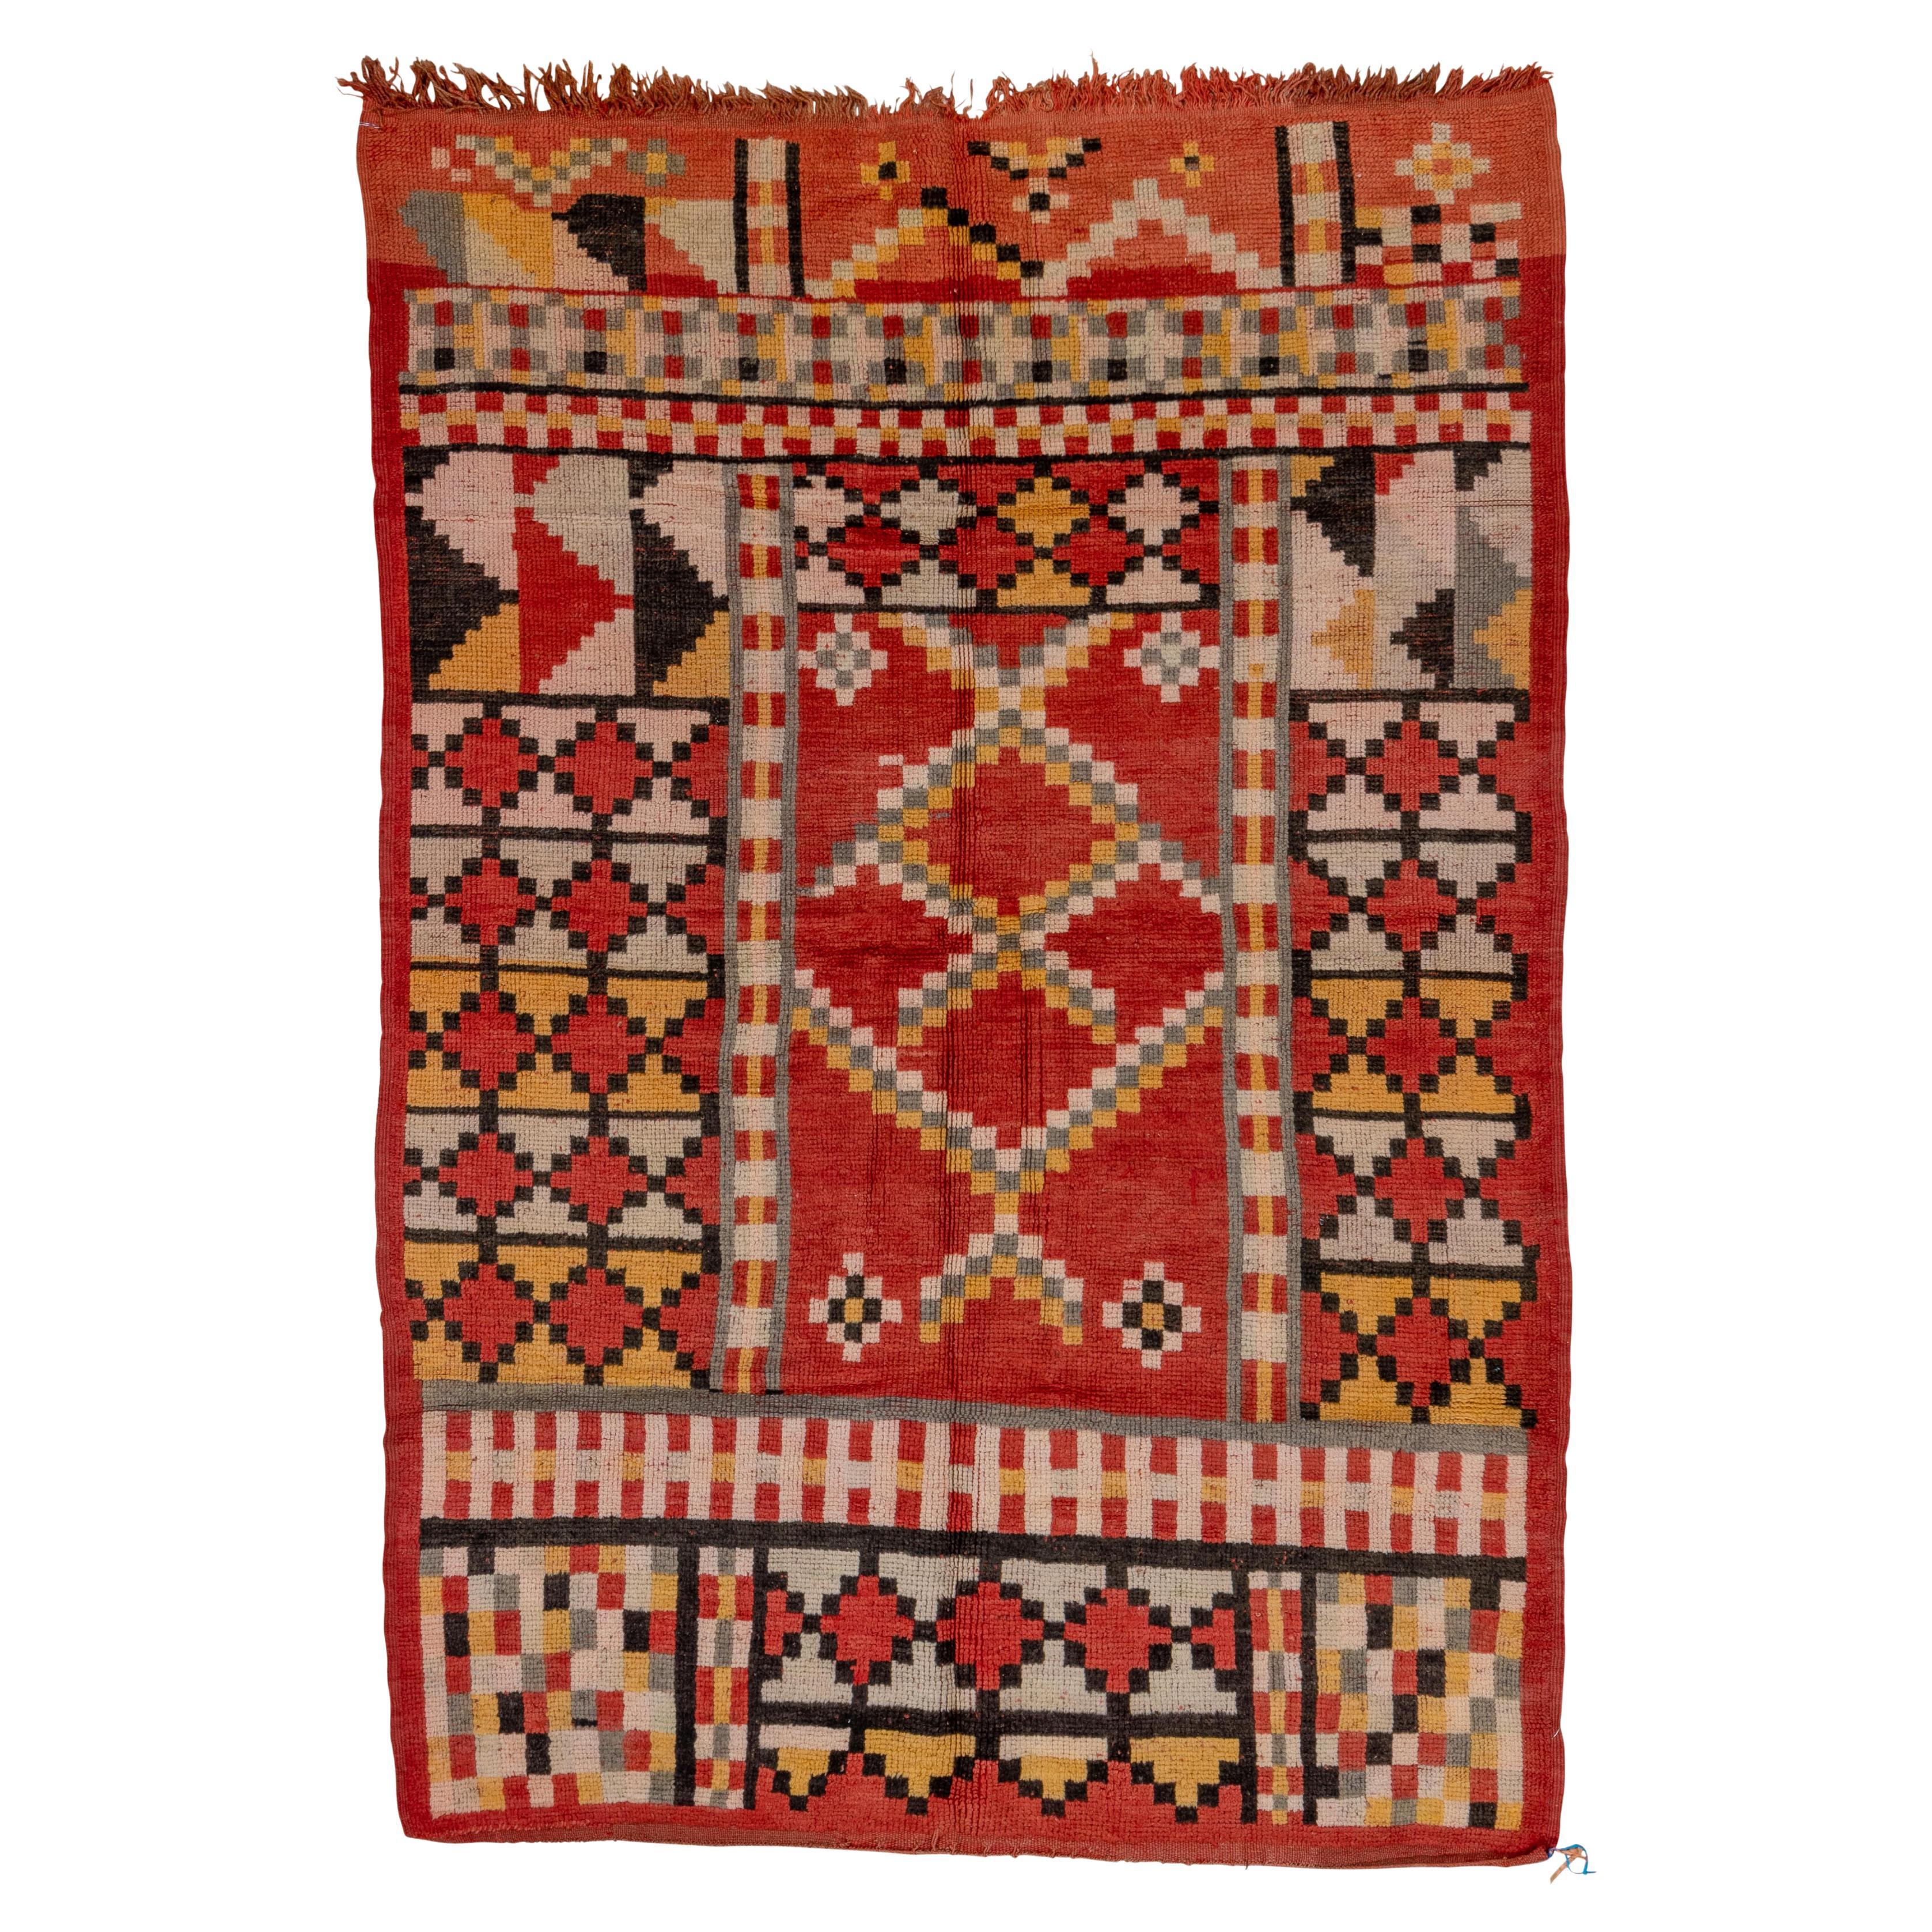 Tribal Geometric Hummingbird Red with Afternoon Tan Hues For Sale